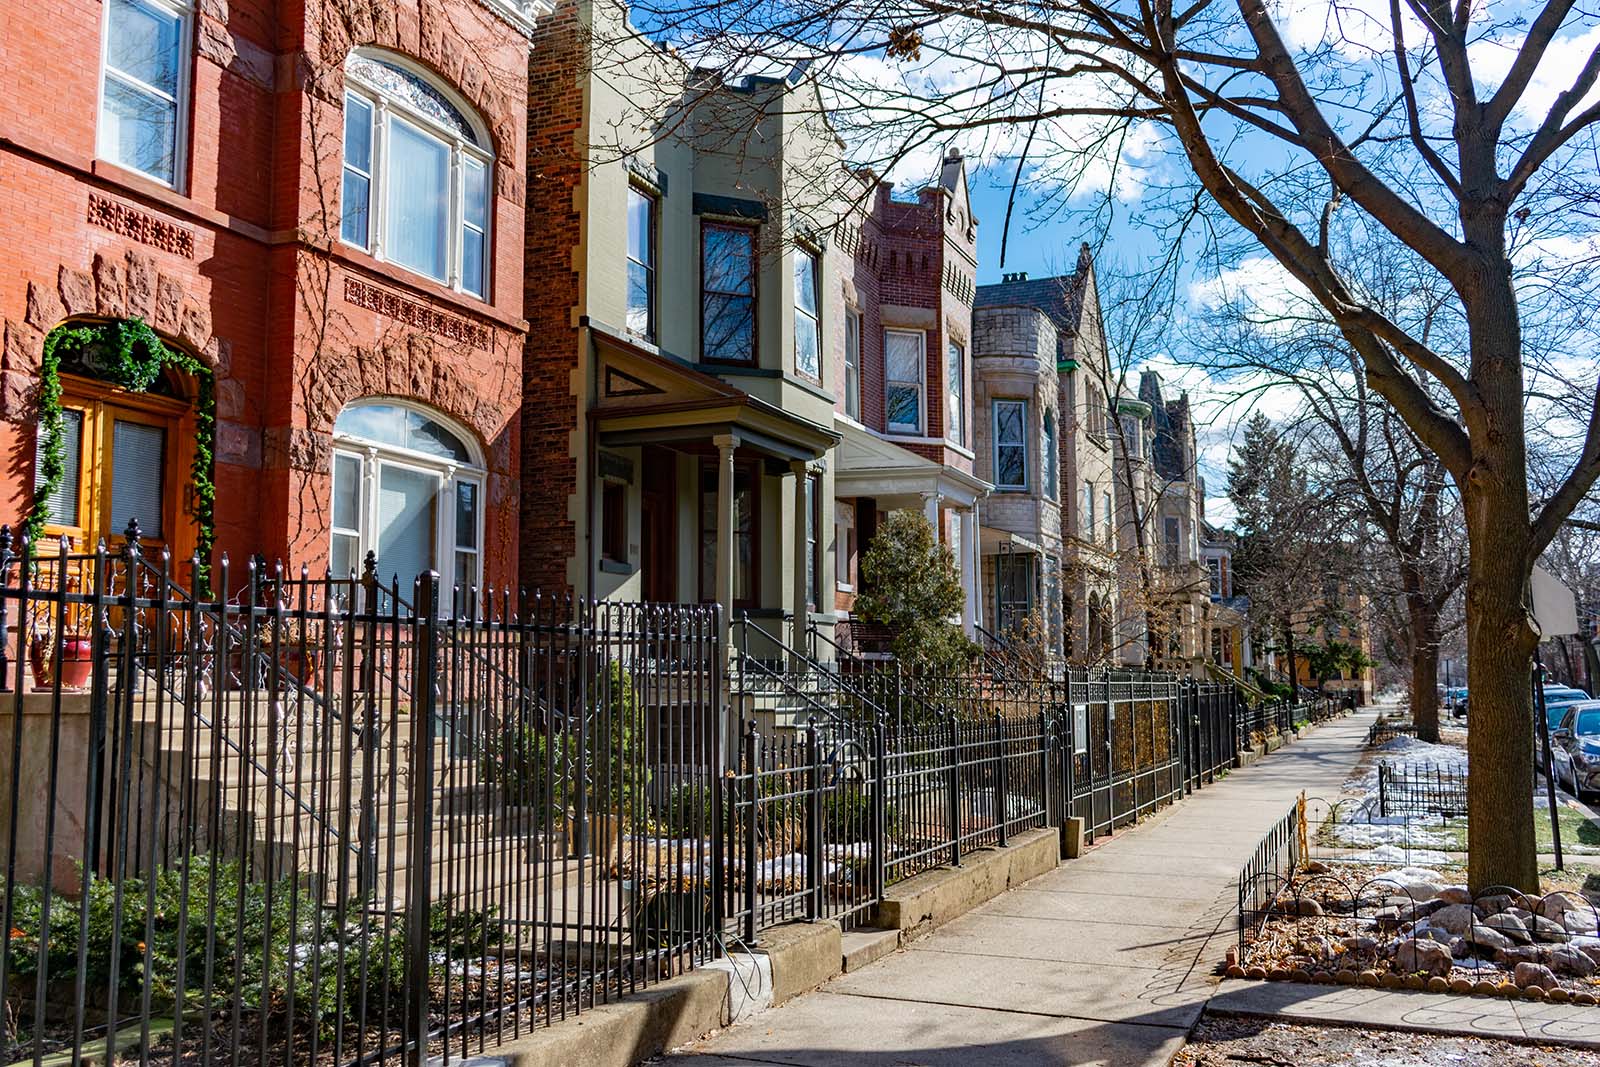 Some of the Best Neighborhoods to Live in Chicago- Pt. 2